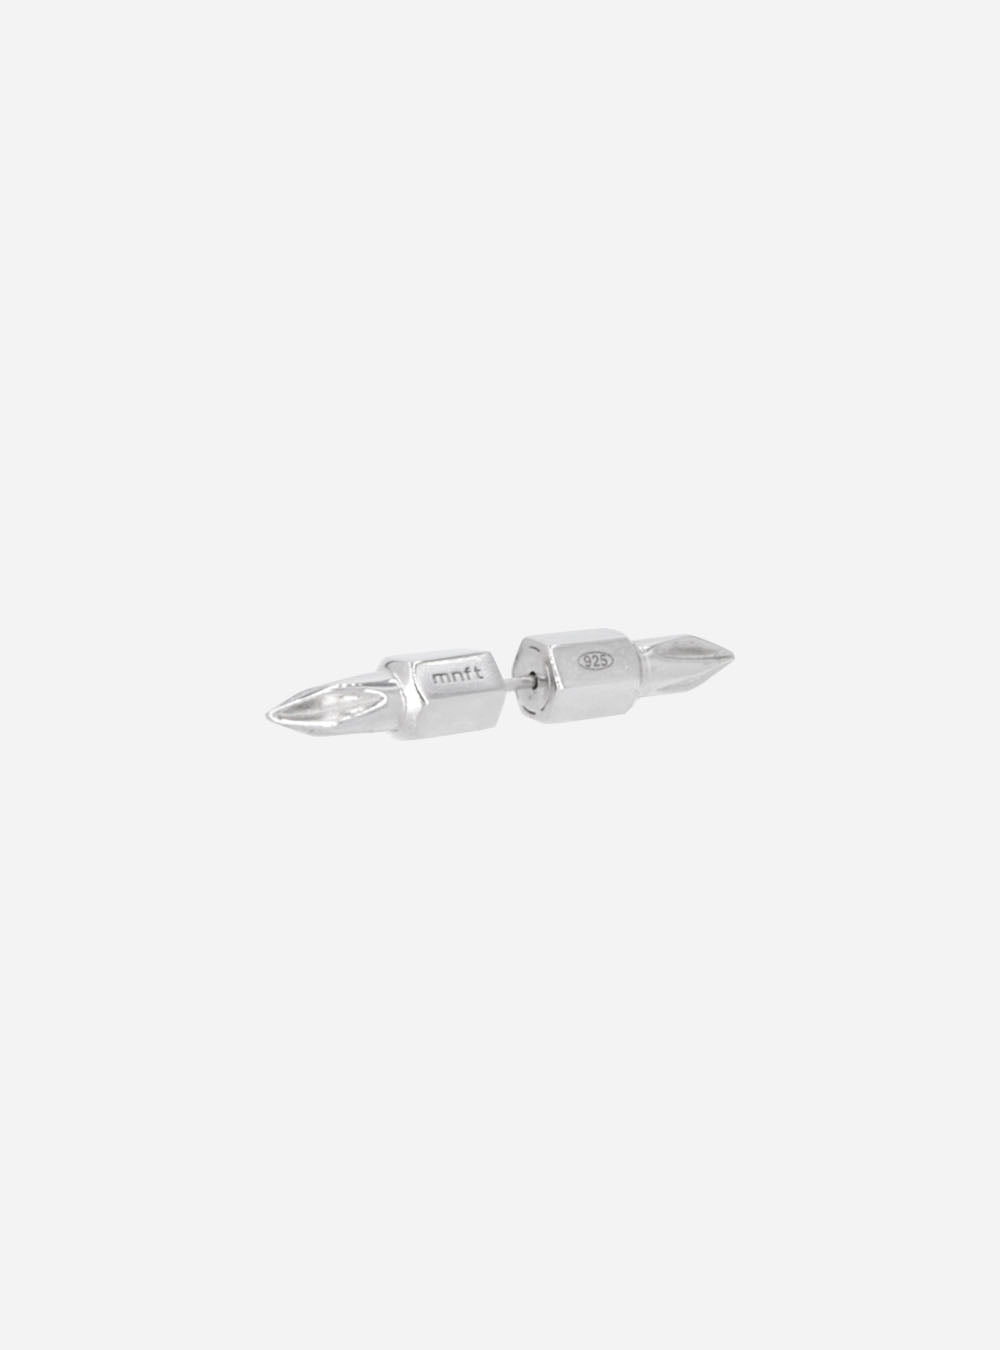 A pair of MIDNIGHTFACTORY Dual-driverbits earrings on a white background.